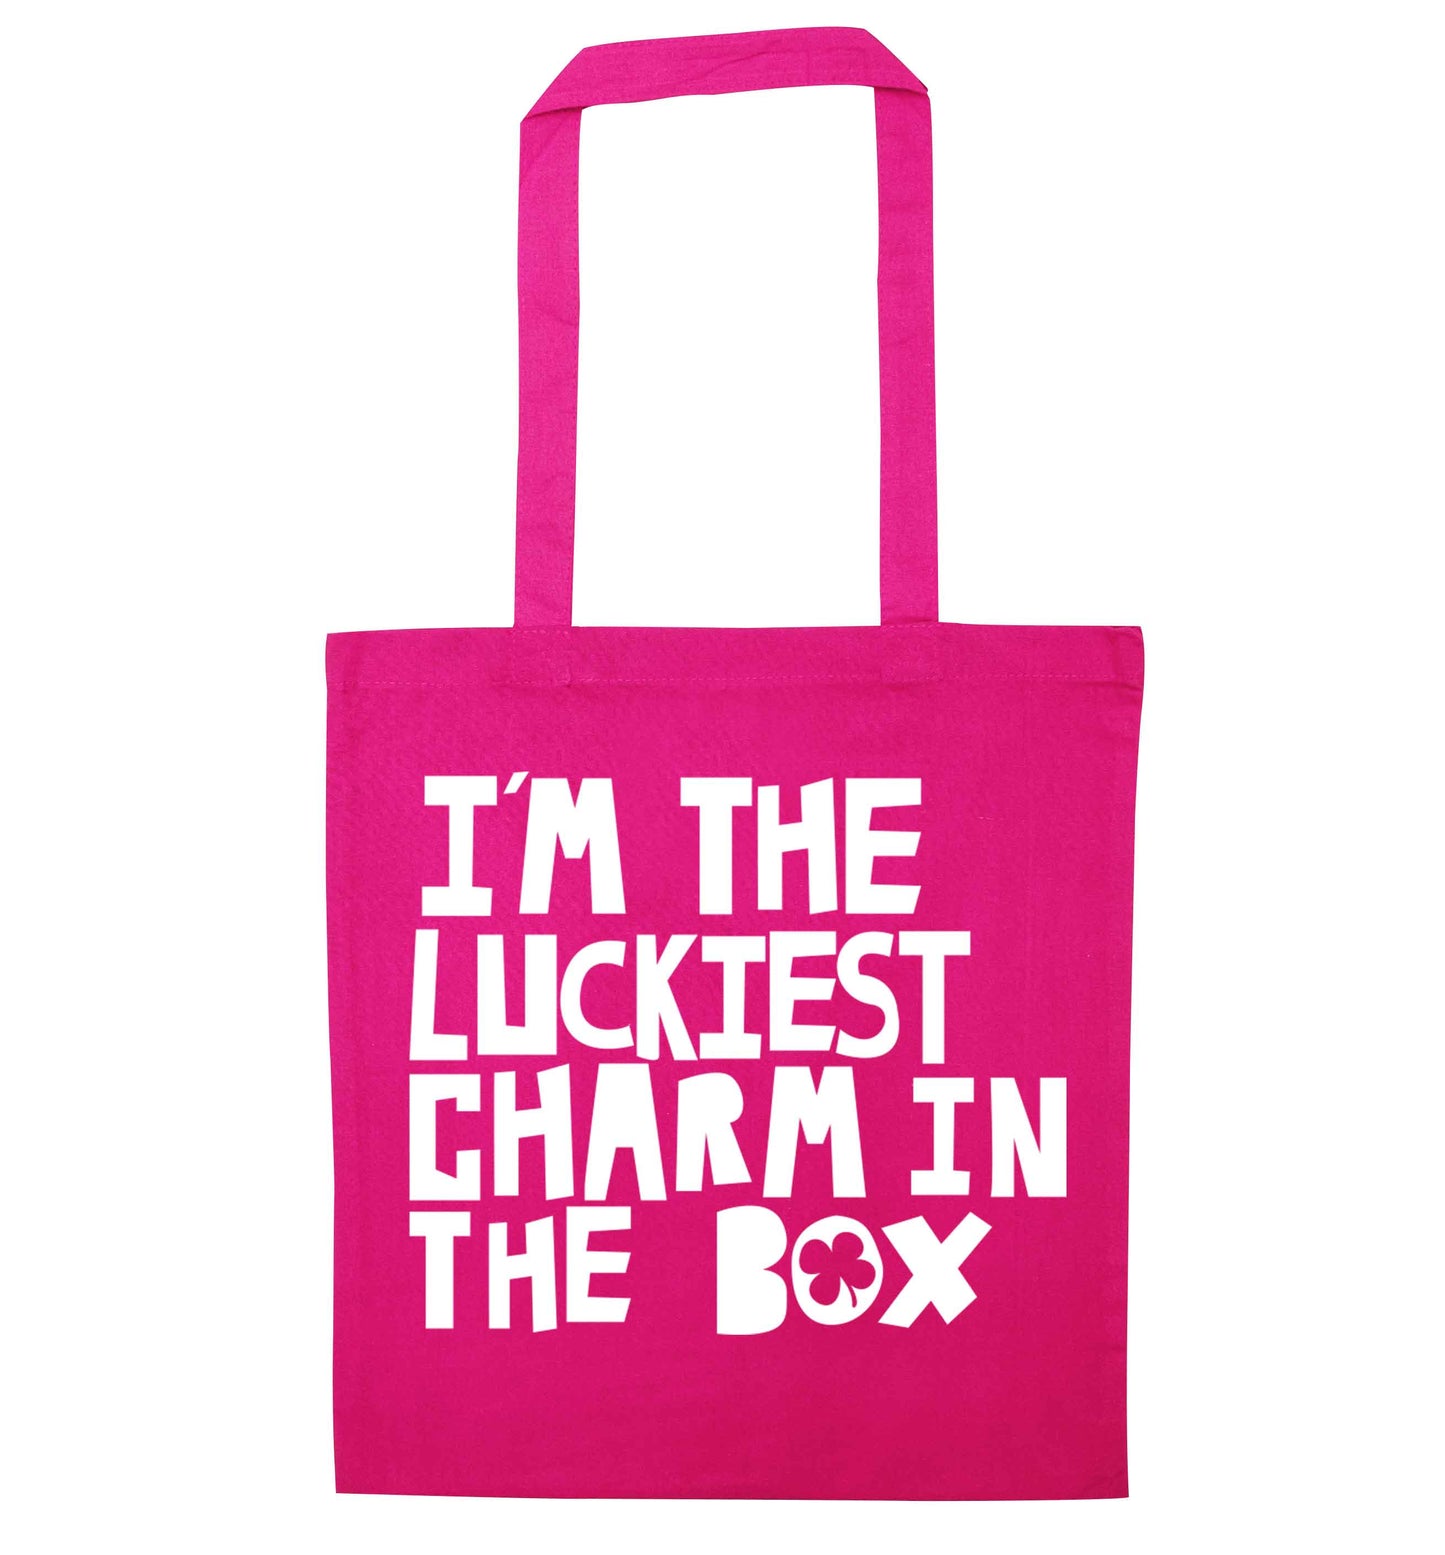 I'm the luckiest charm in the box pink tote bag